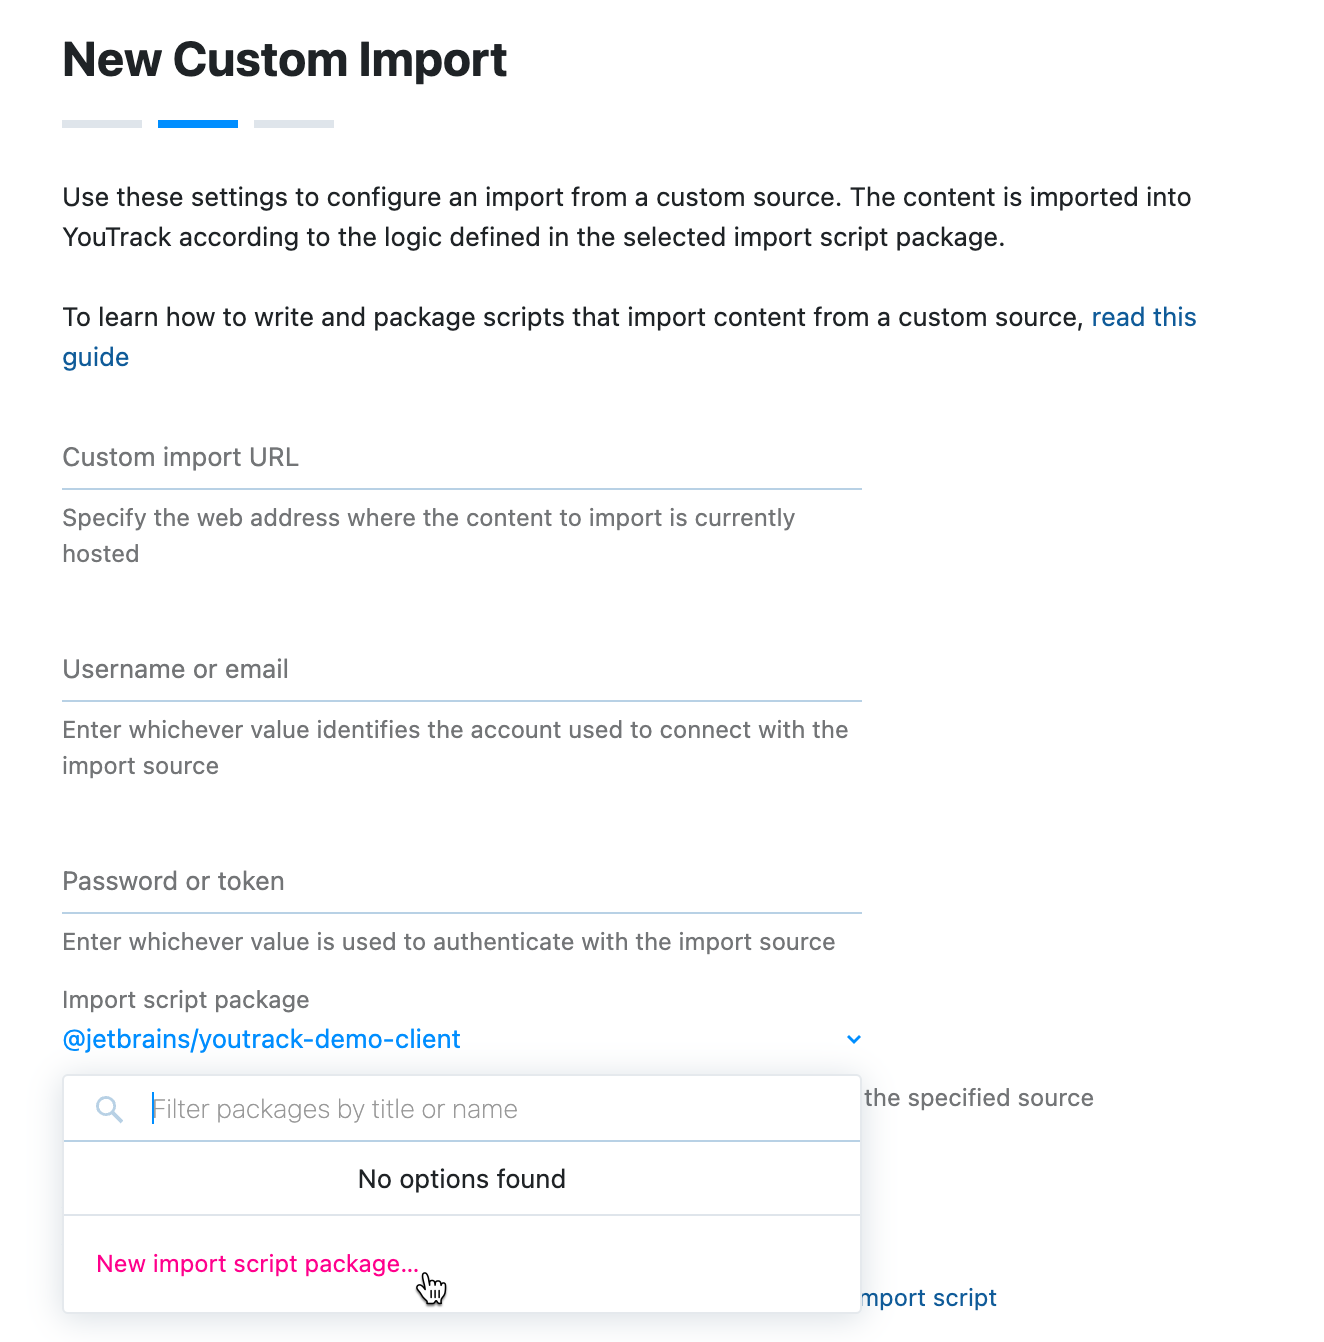 Create new import script package